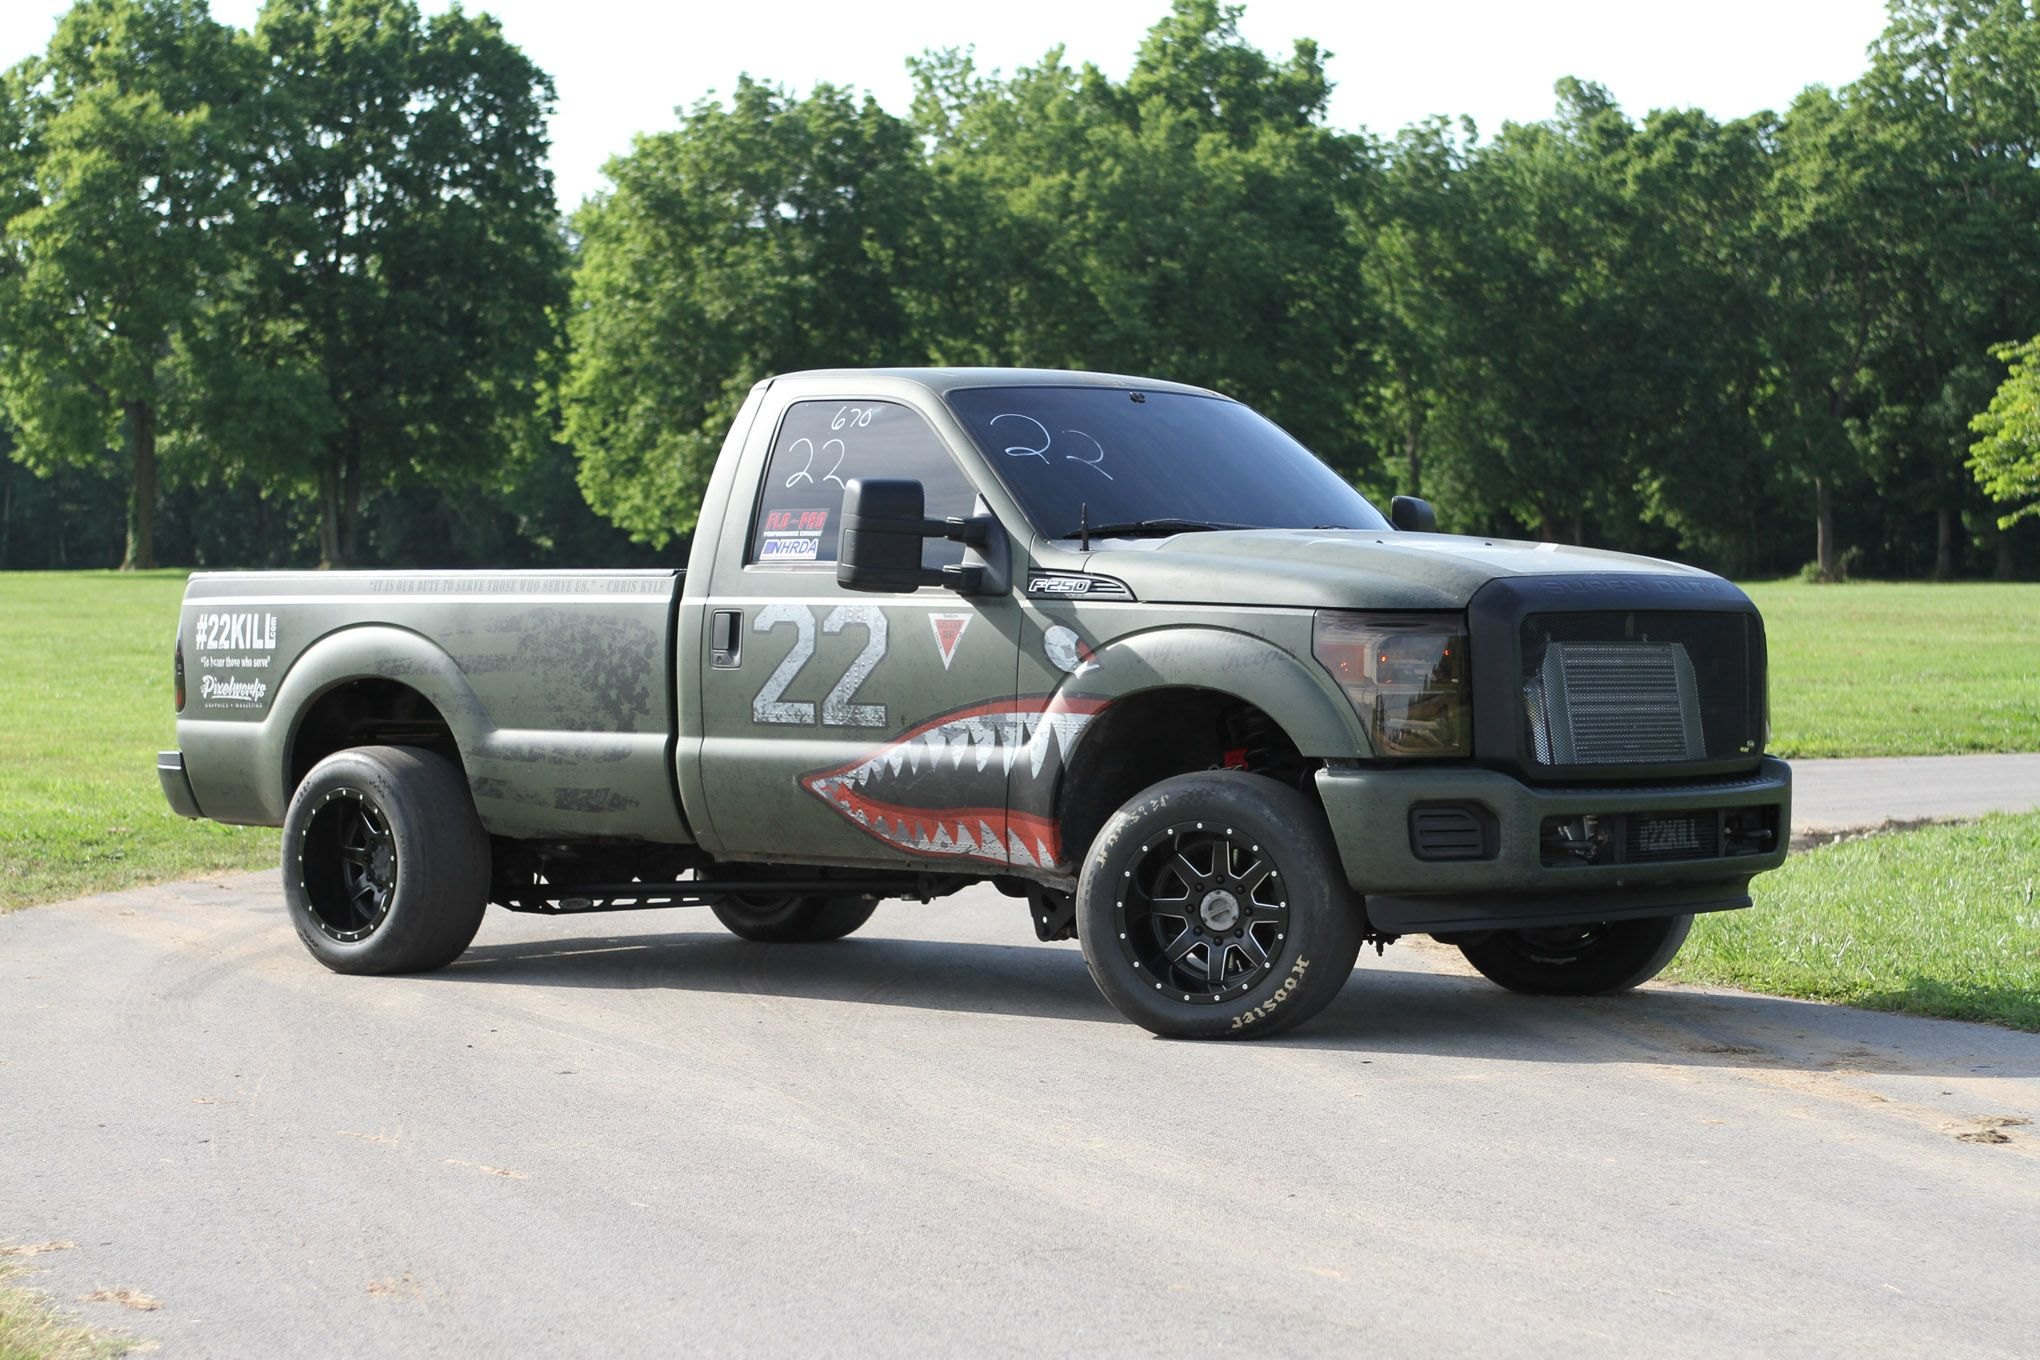 Green Lifted Ford F-250 with Aftermarket Dark Smoke Headlights - Photo by Adam Dobbs